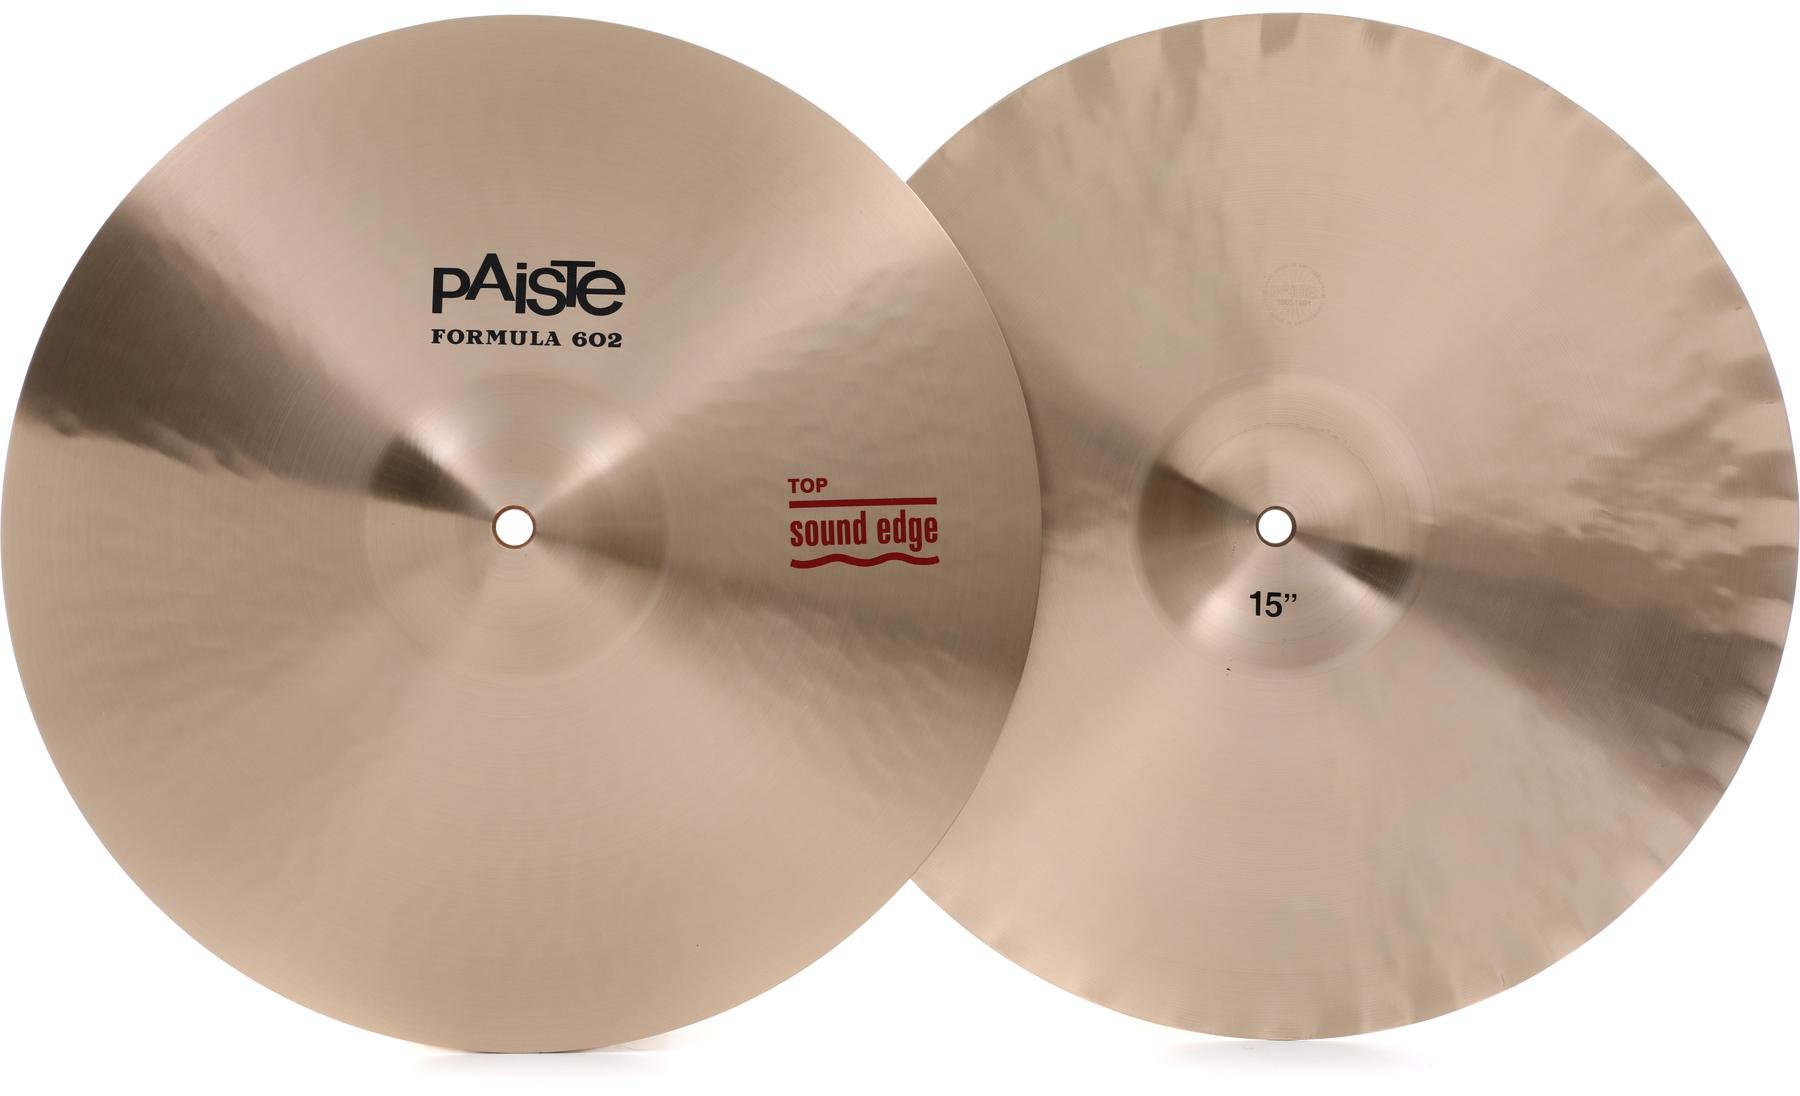 Paiste 15 inch Formula 602 Sound Edge Hi-hat Cymbals | Sweetwater